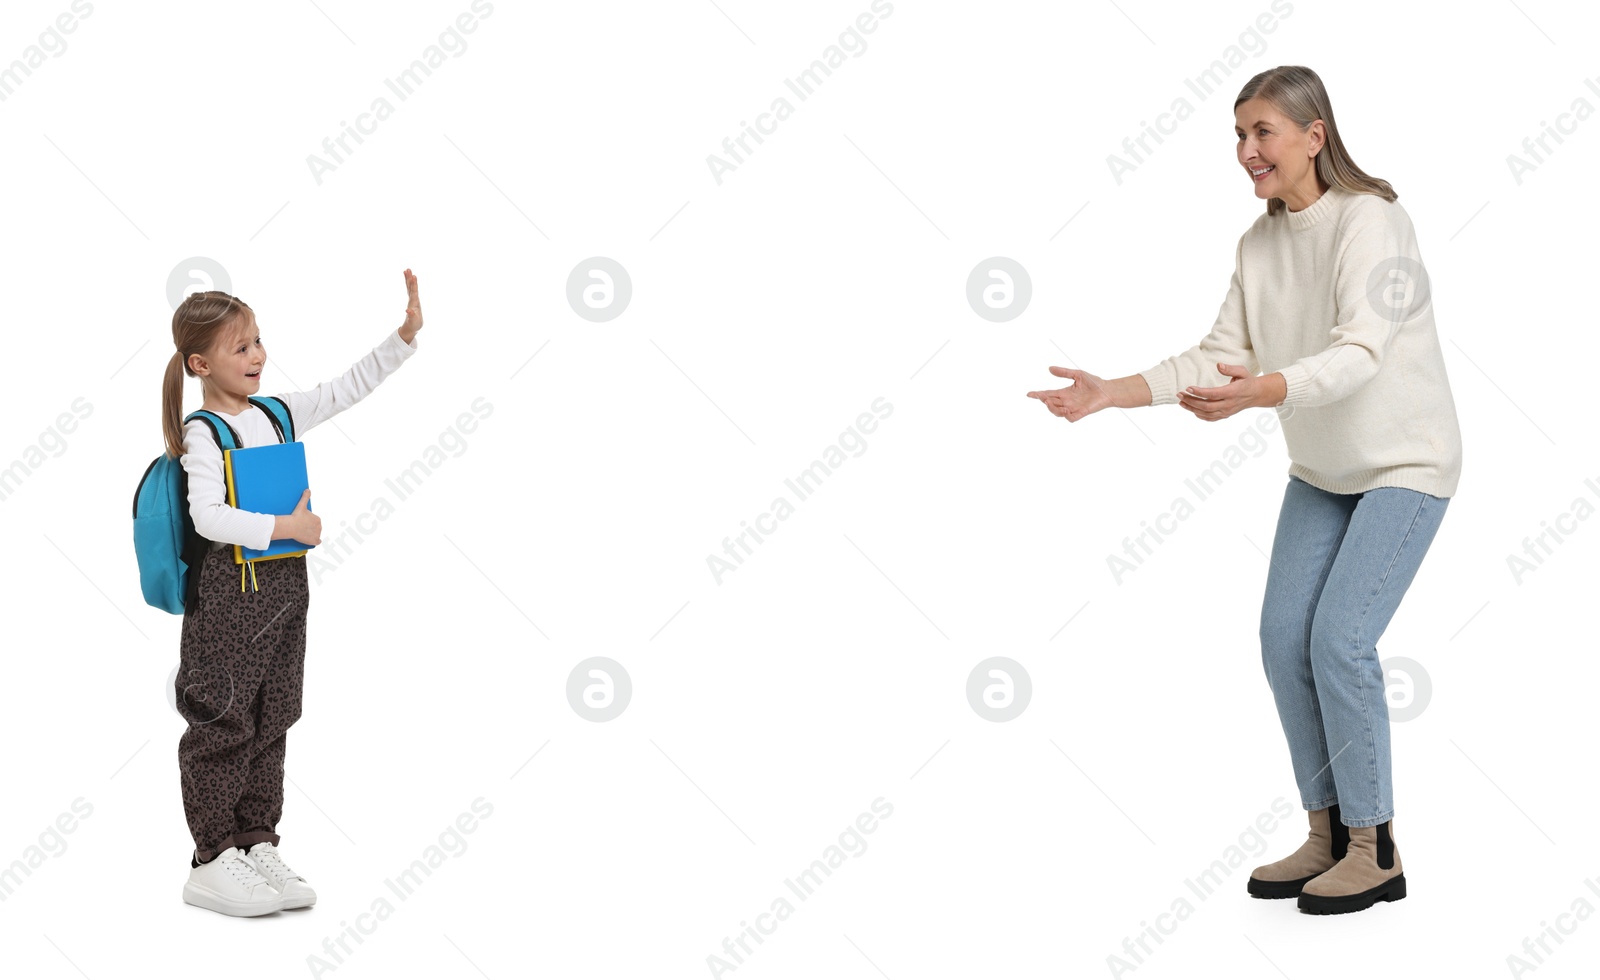 Image of Senior woman meeting her granddaughter after school on white background